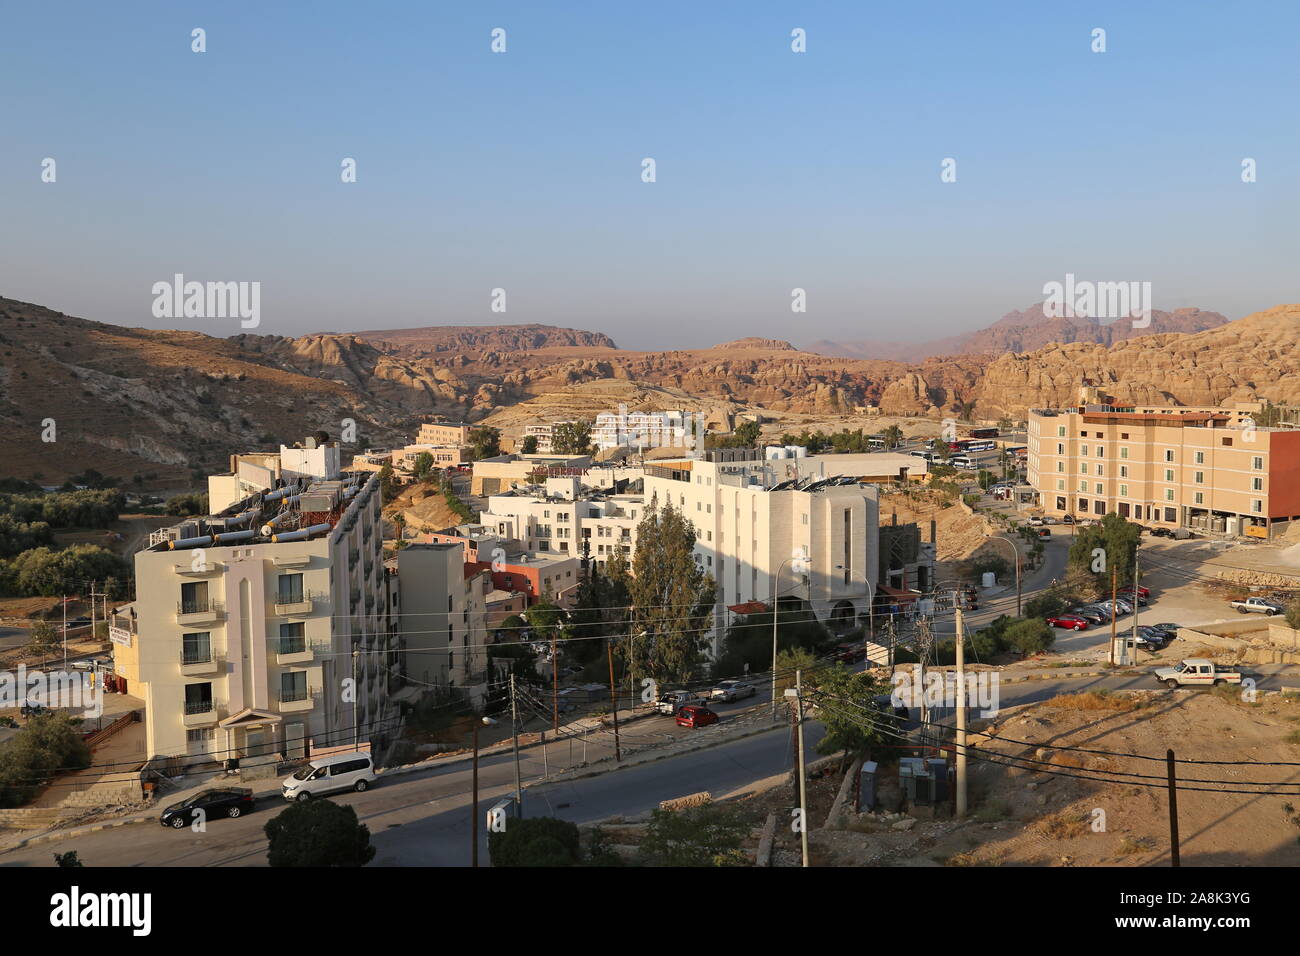 View from Candles Hotel, Wadi Musa, Ma'an Governorate, Jordan, Middle East Stock Photo